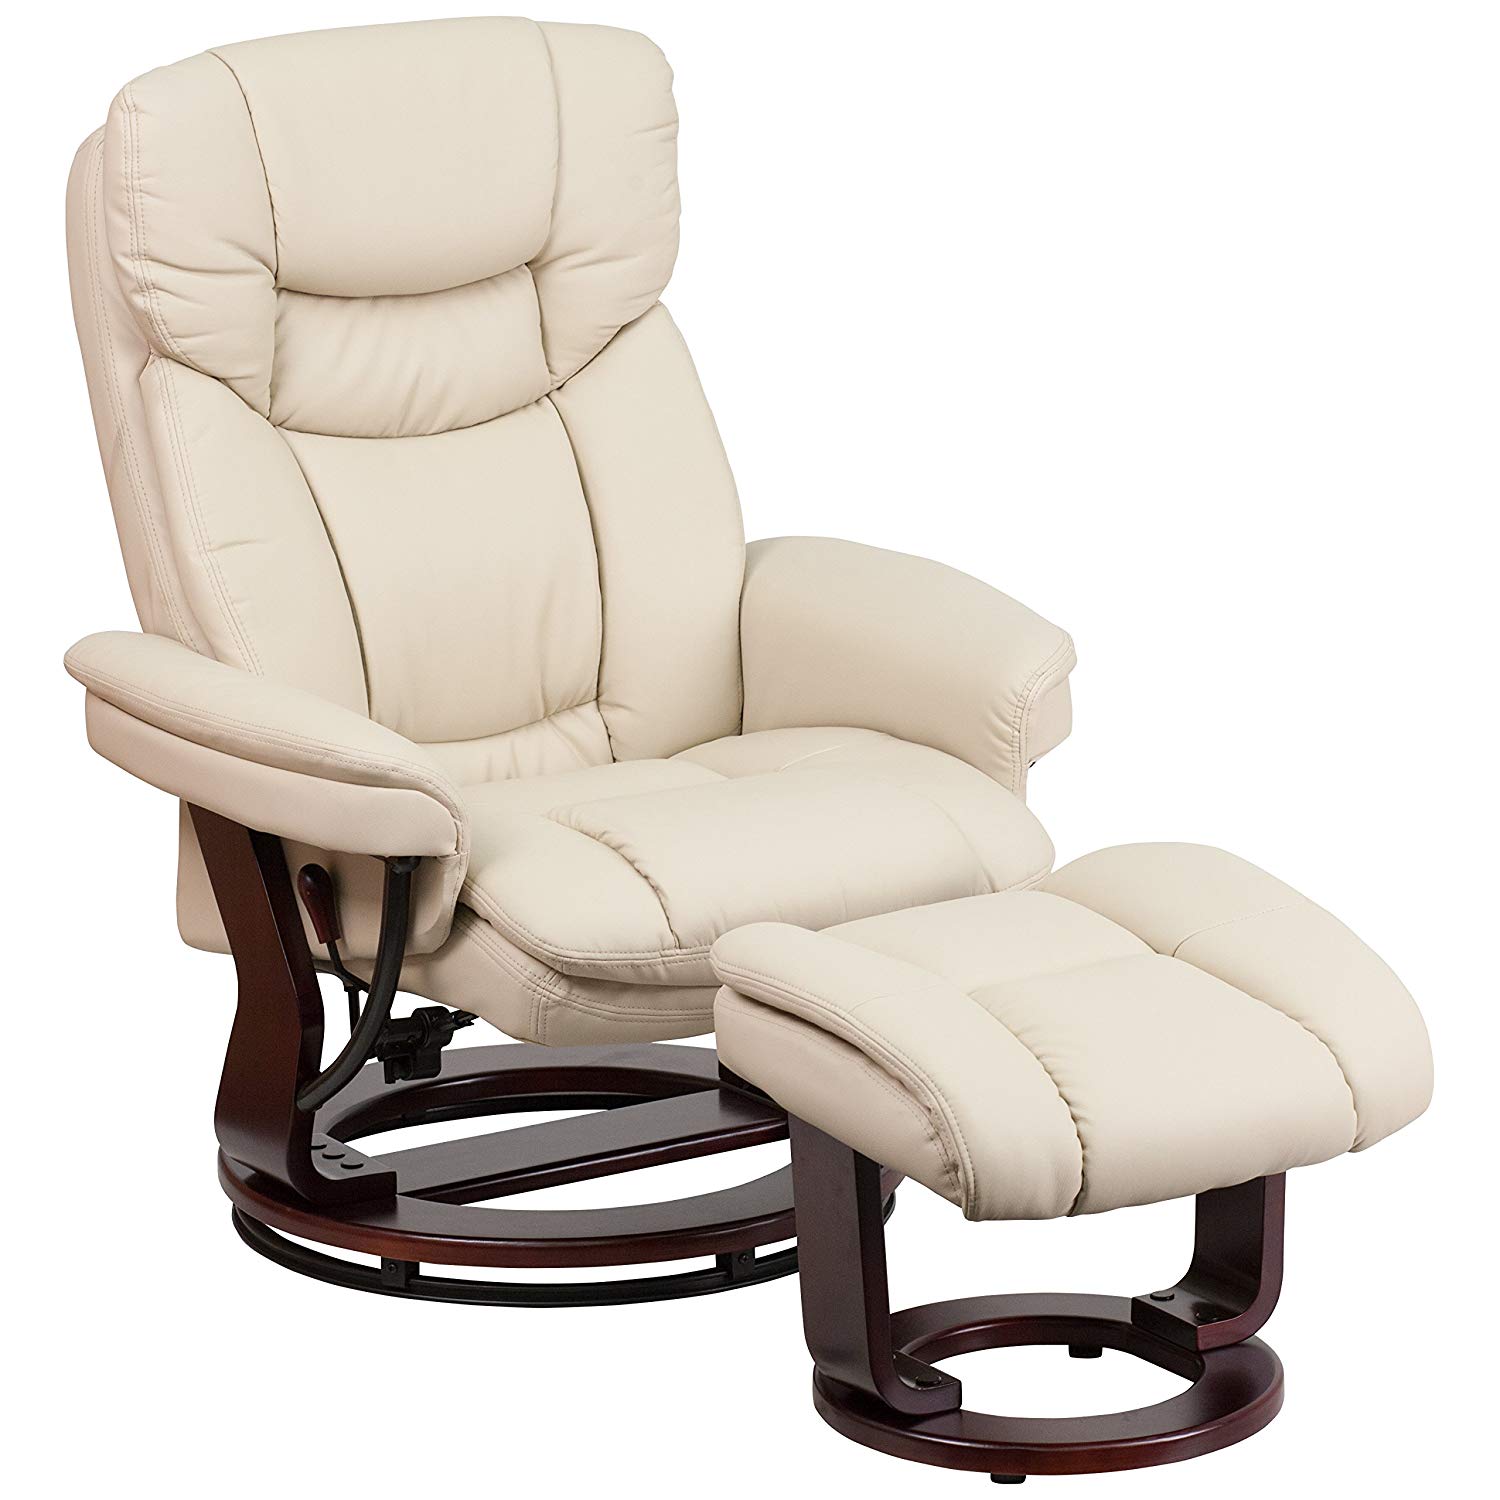 Flash Furniture Contemporary Beige Leather Recliner